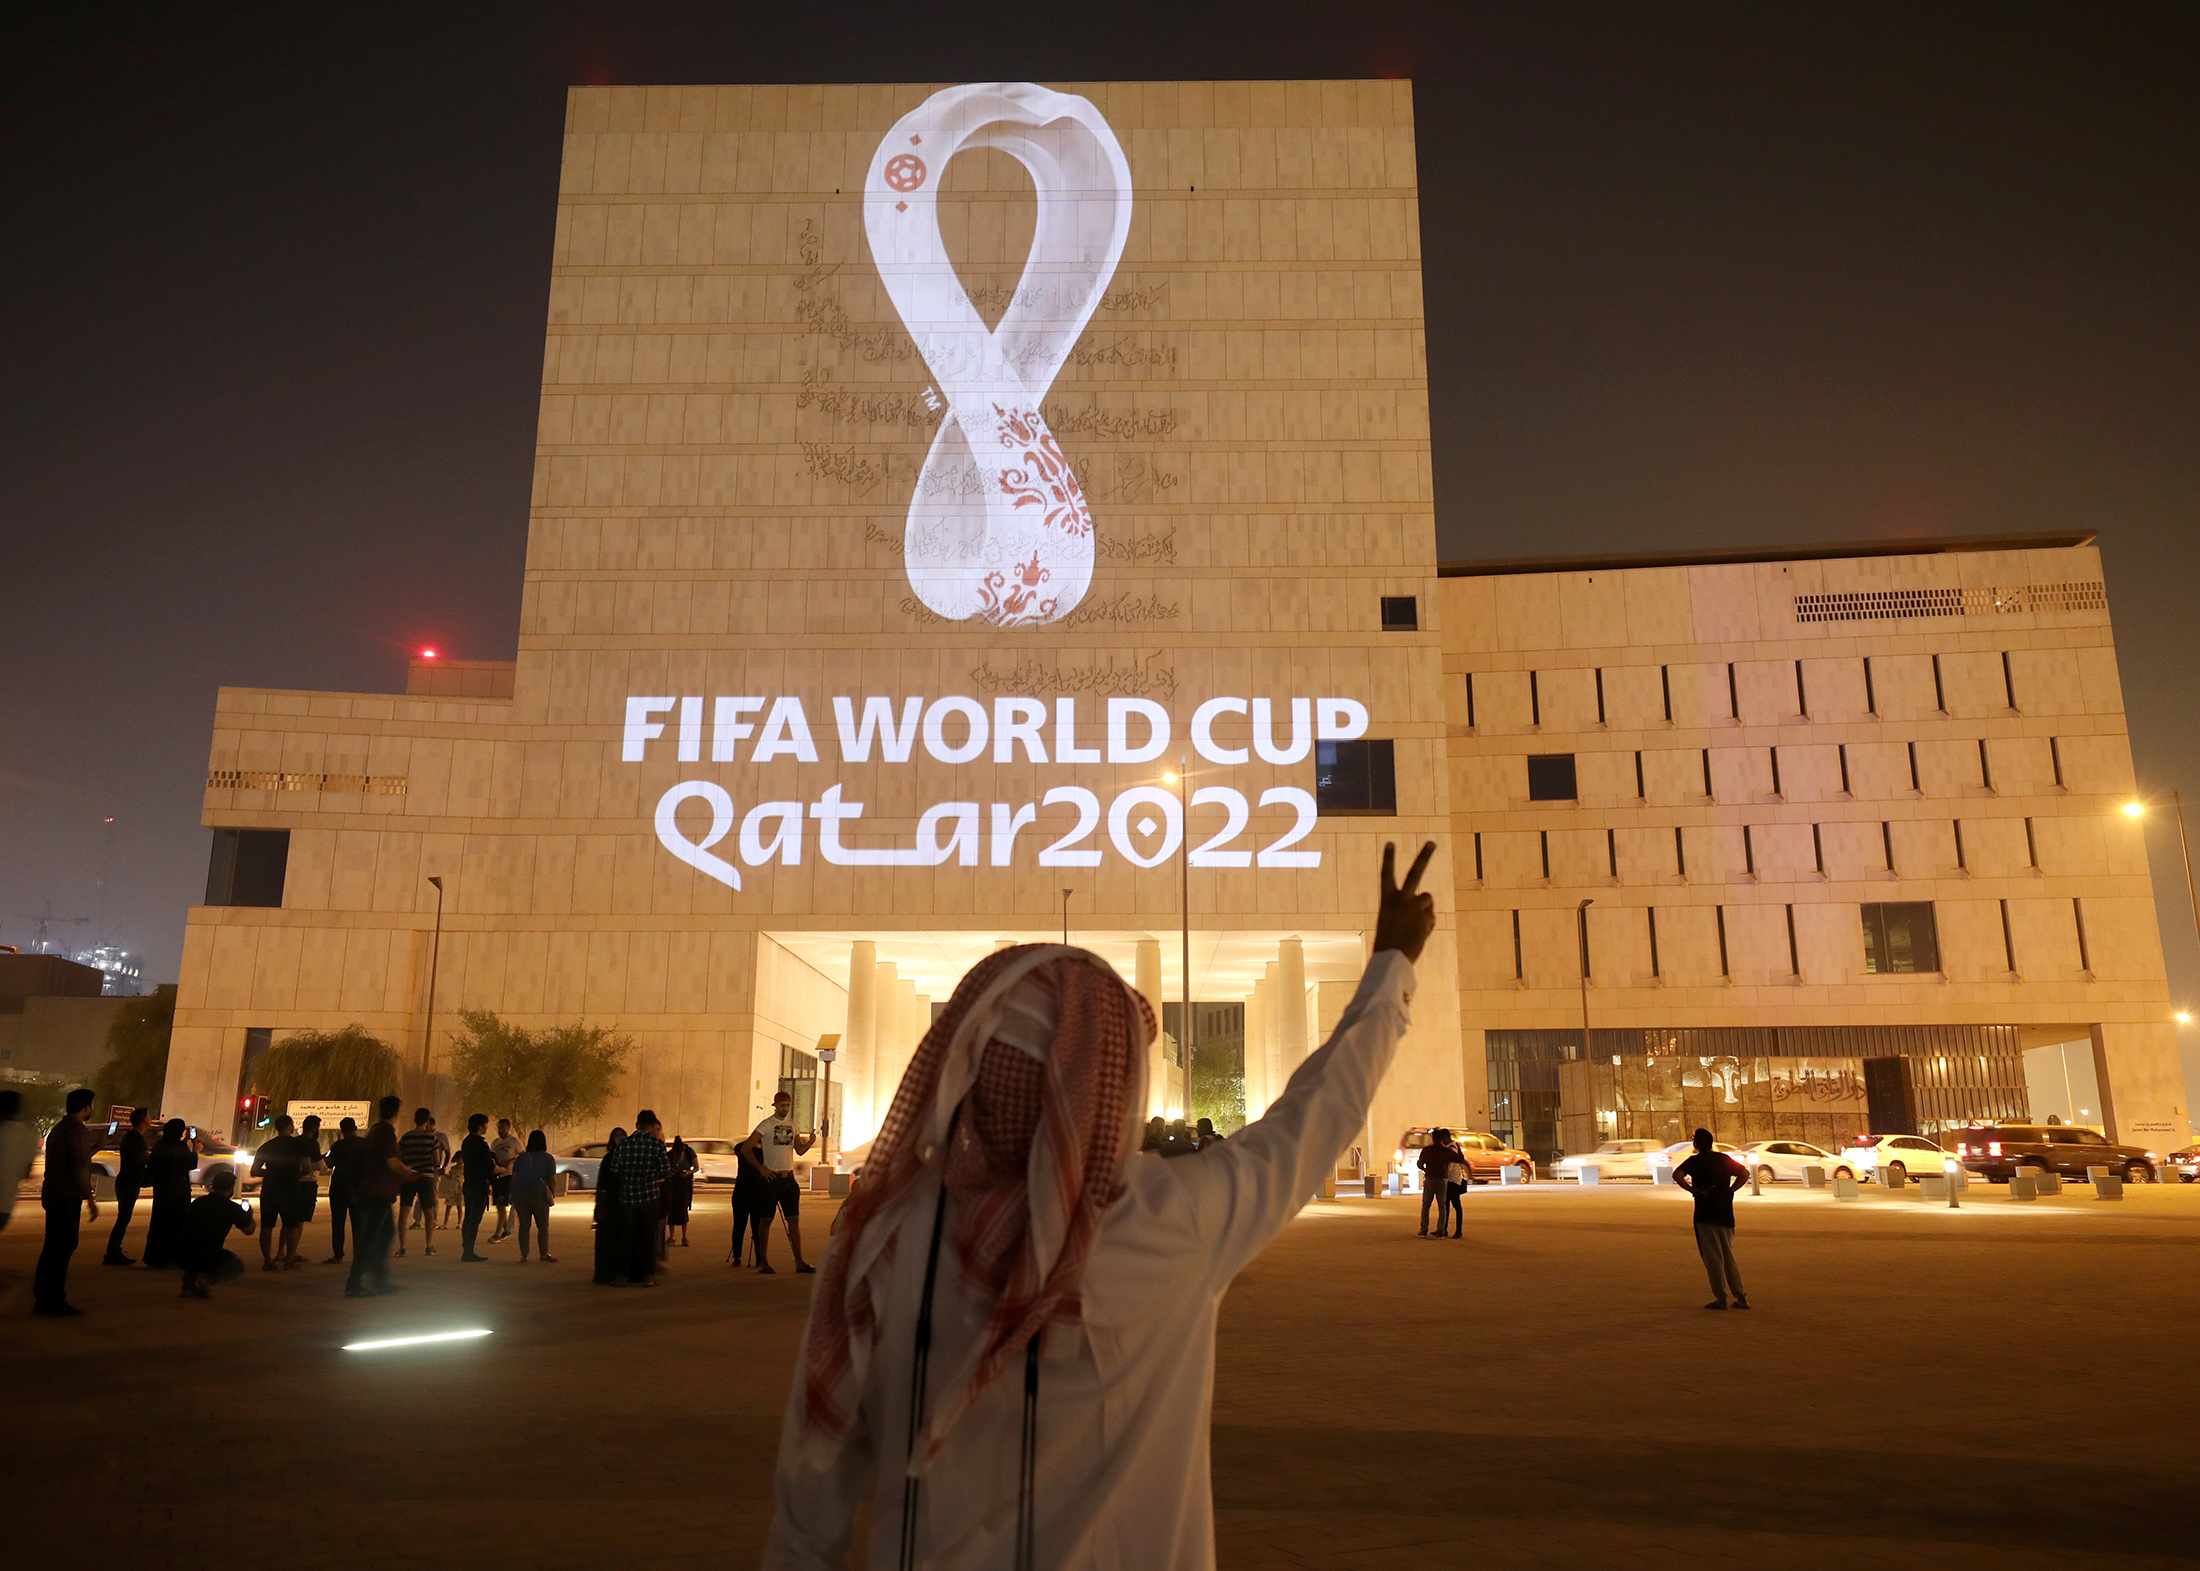 Opening Ceremony for Qatar FIFA World Cup 2022: Date, time and how